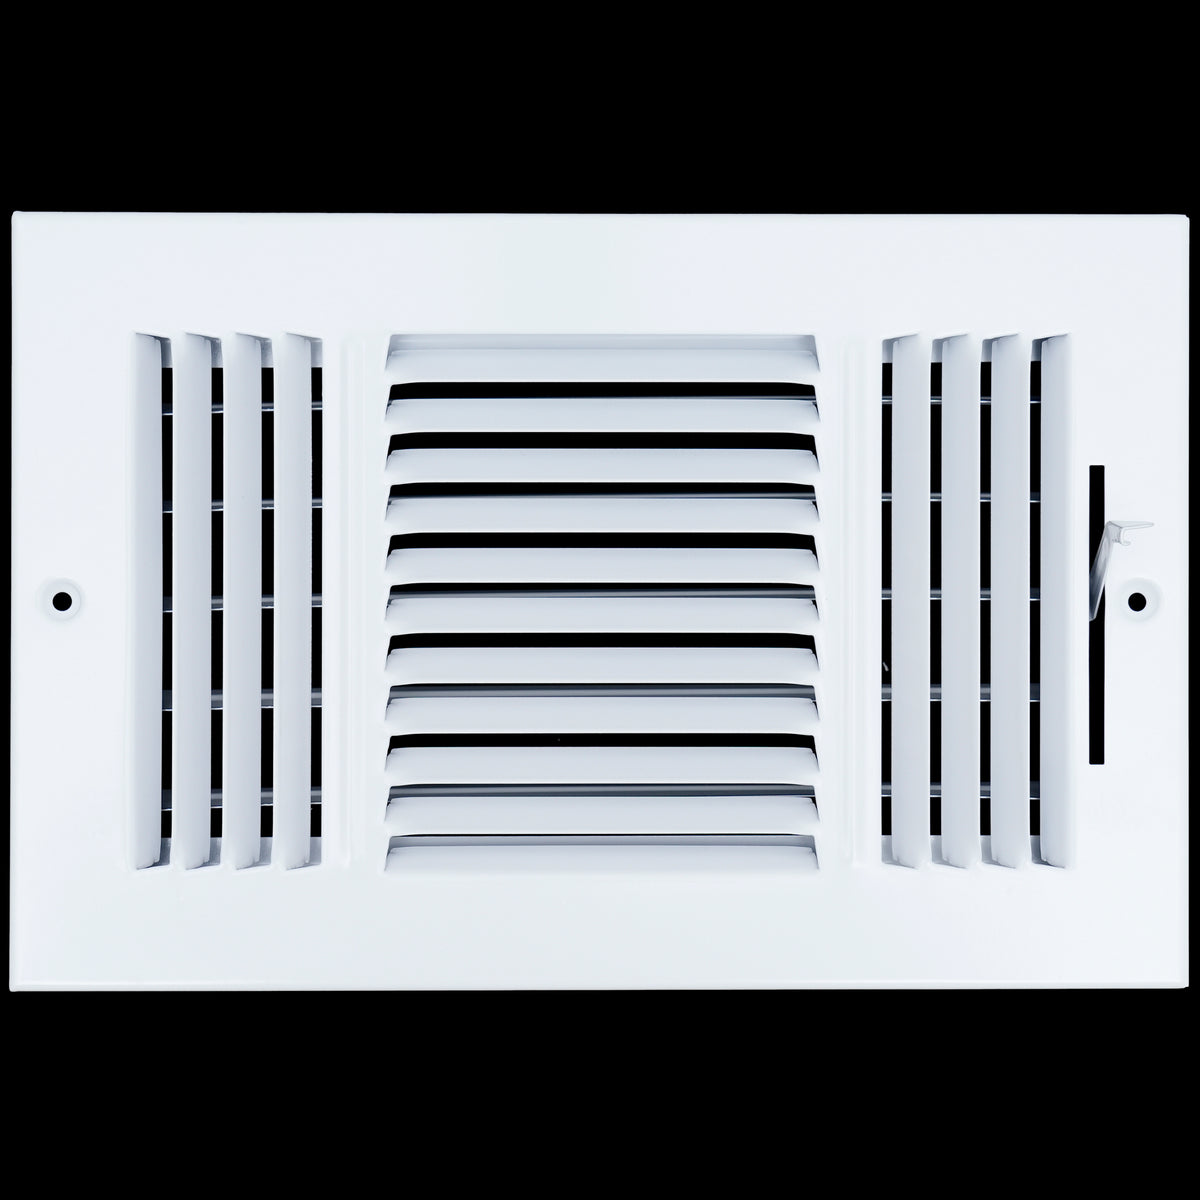 airgrilles 10 x 6 duct opening - 3 way steel air supply diffuser for sidewall and ceiling hnd-asg-wh-3way-10x6 764613097542 - 1